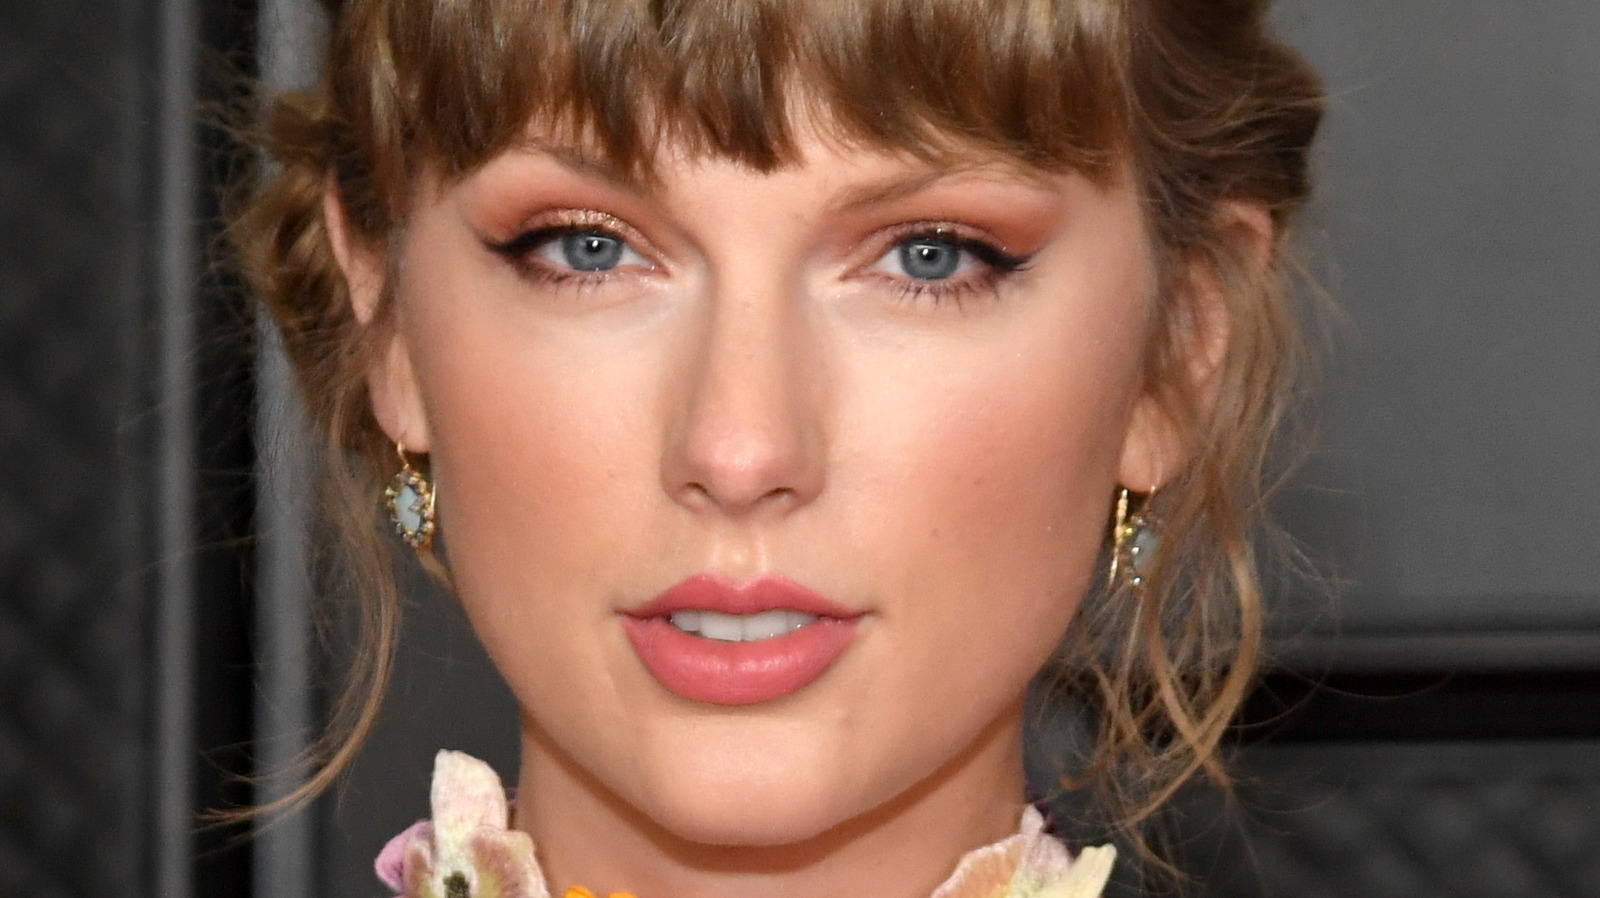 On 'Midnights', Taylor Swift Is Revising Her Own Love Stories